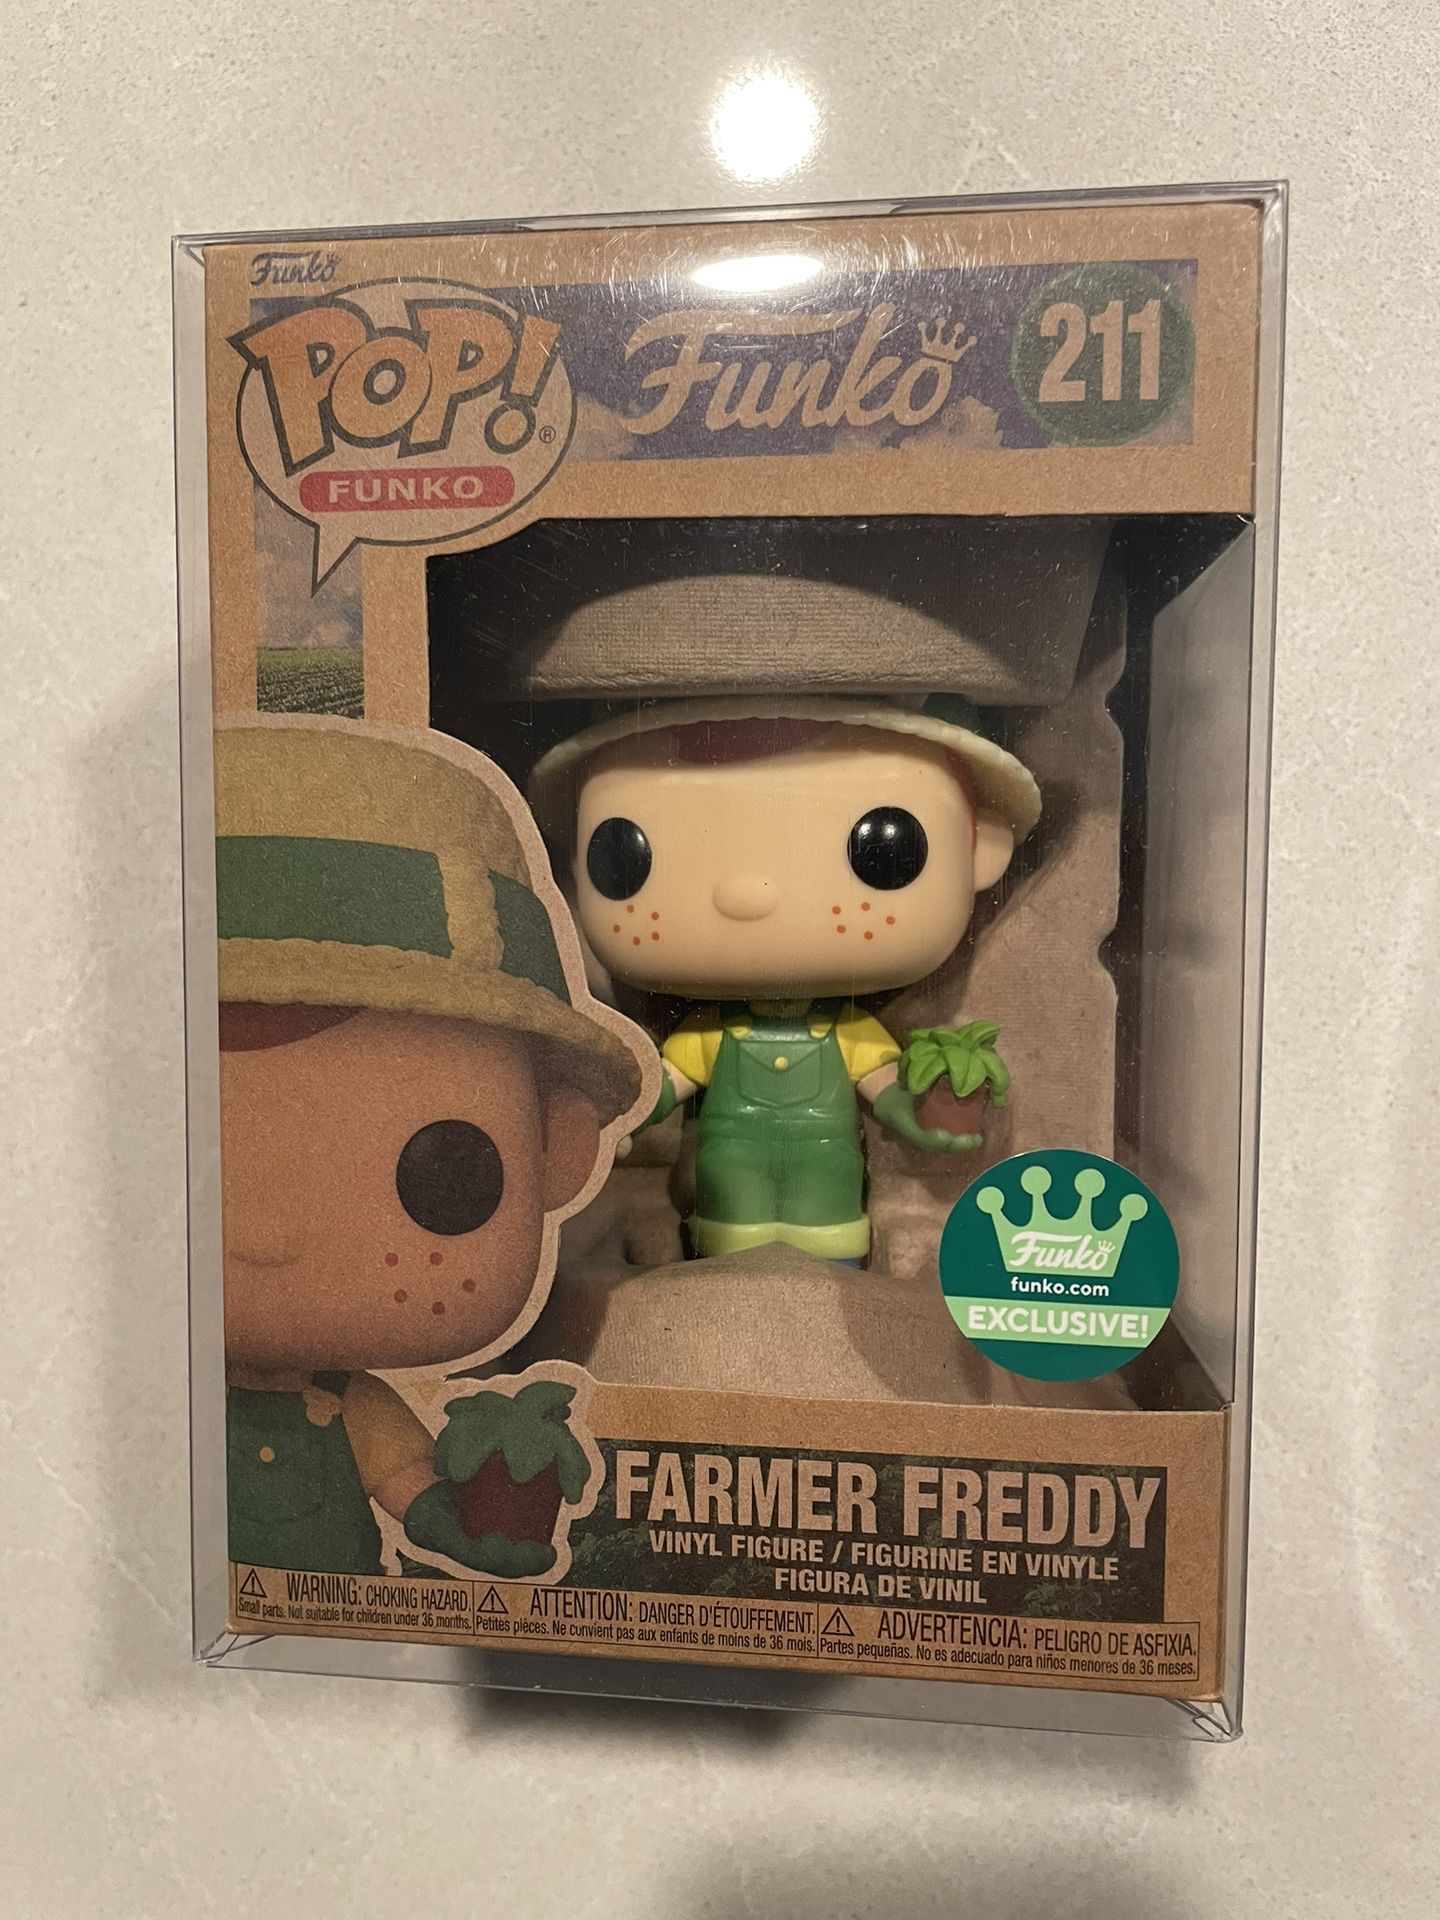 Farmer Freddy Funko Pop *MINT* Online Shop Exclusive 211 with protector Earth Day